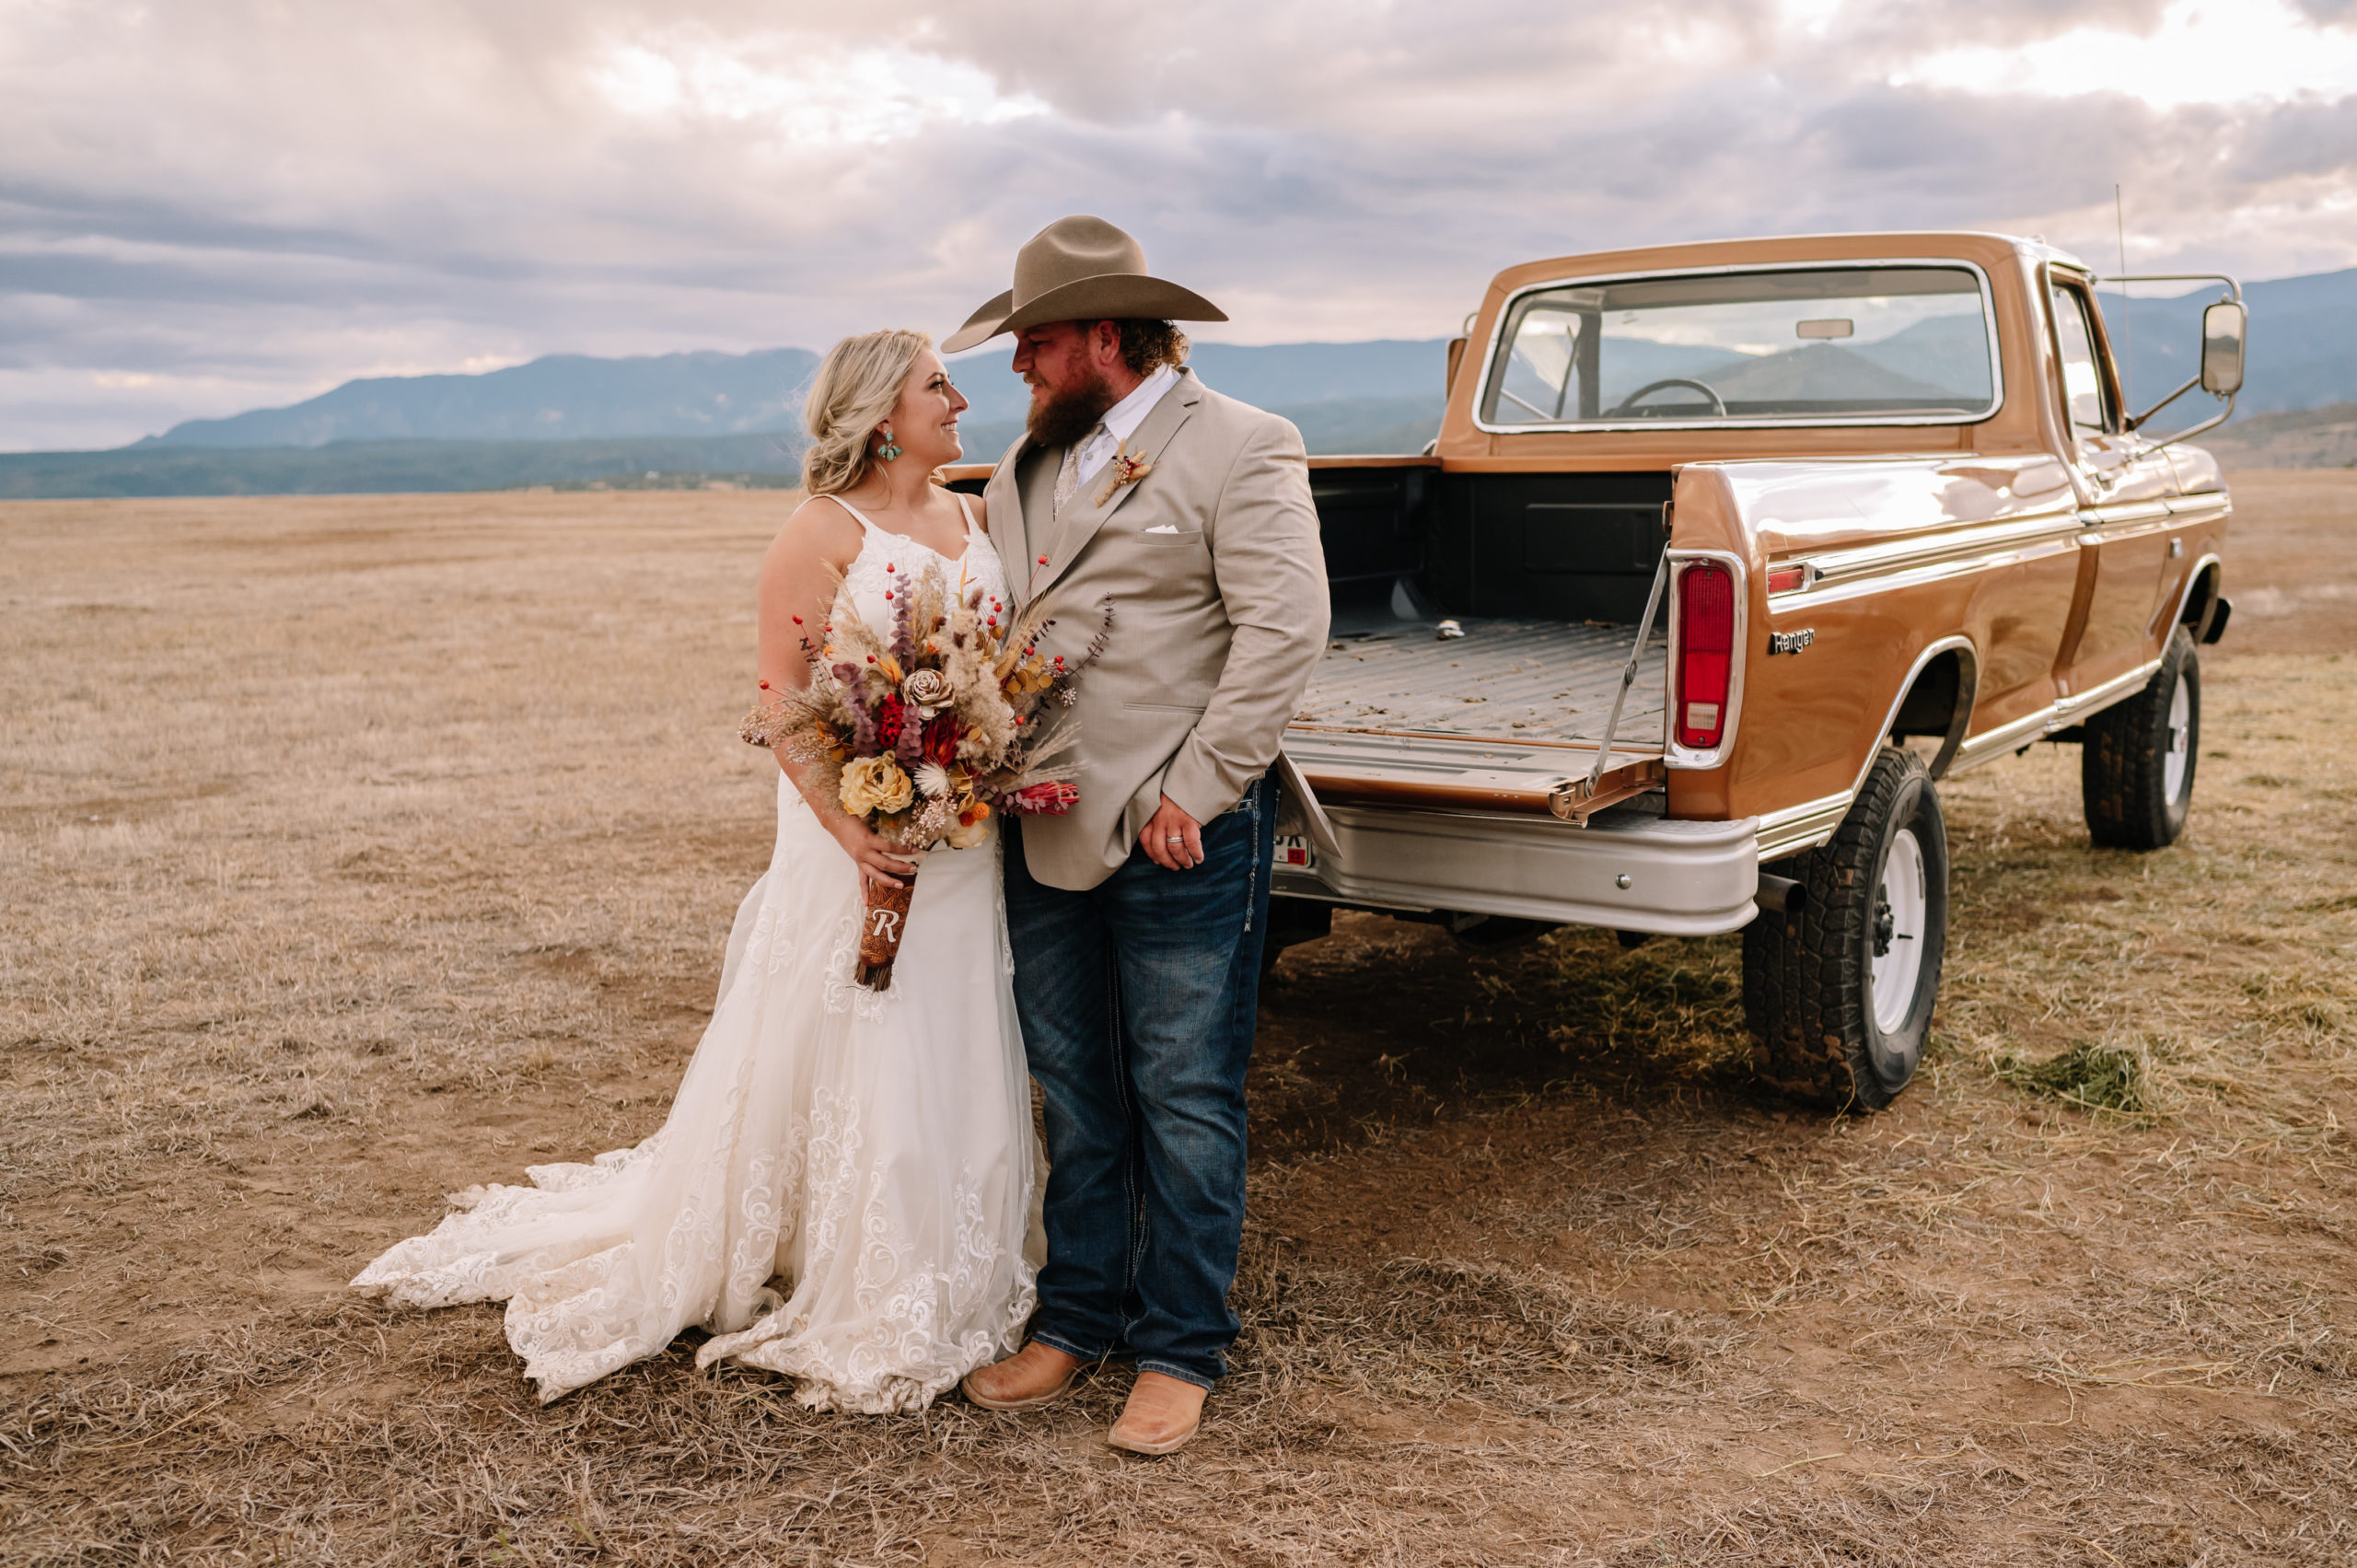 Bride and groom looking into eachother's eyes in front of old Ford pickup truck.